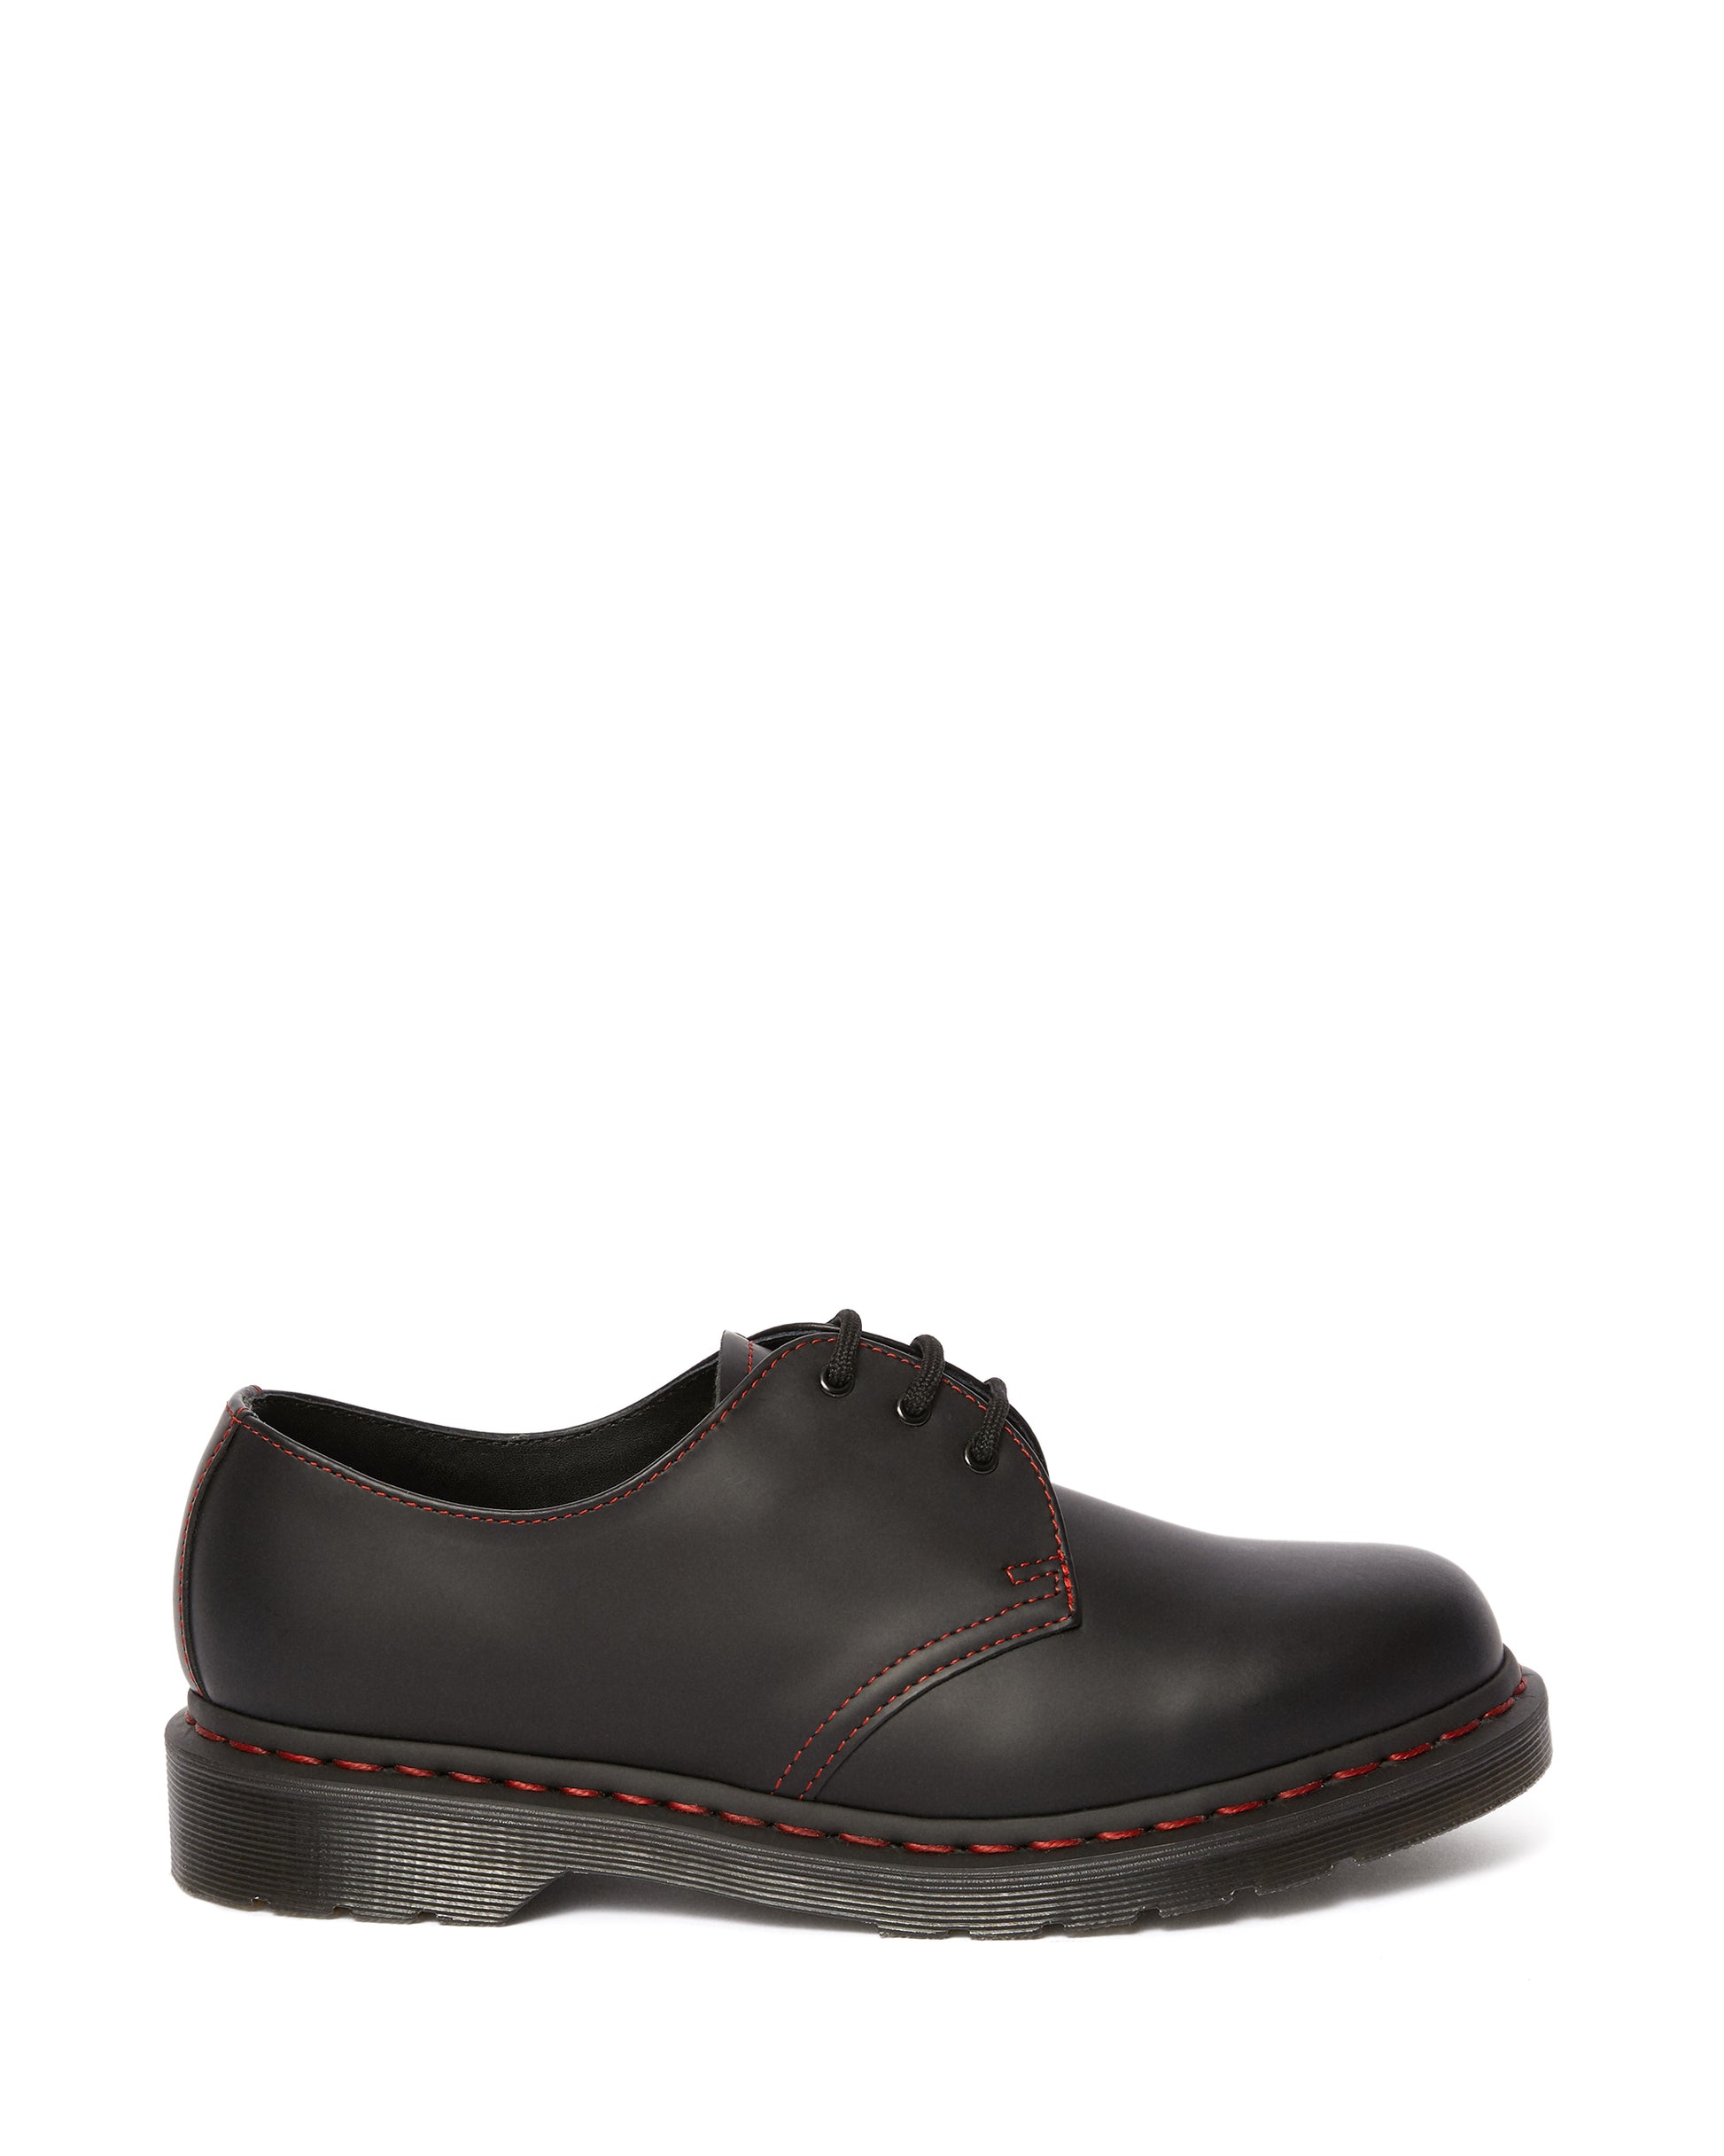 1461 BLACK SMOOTH OXFORD – Posers Hollywood